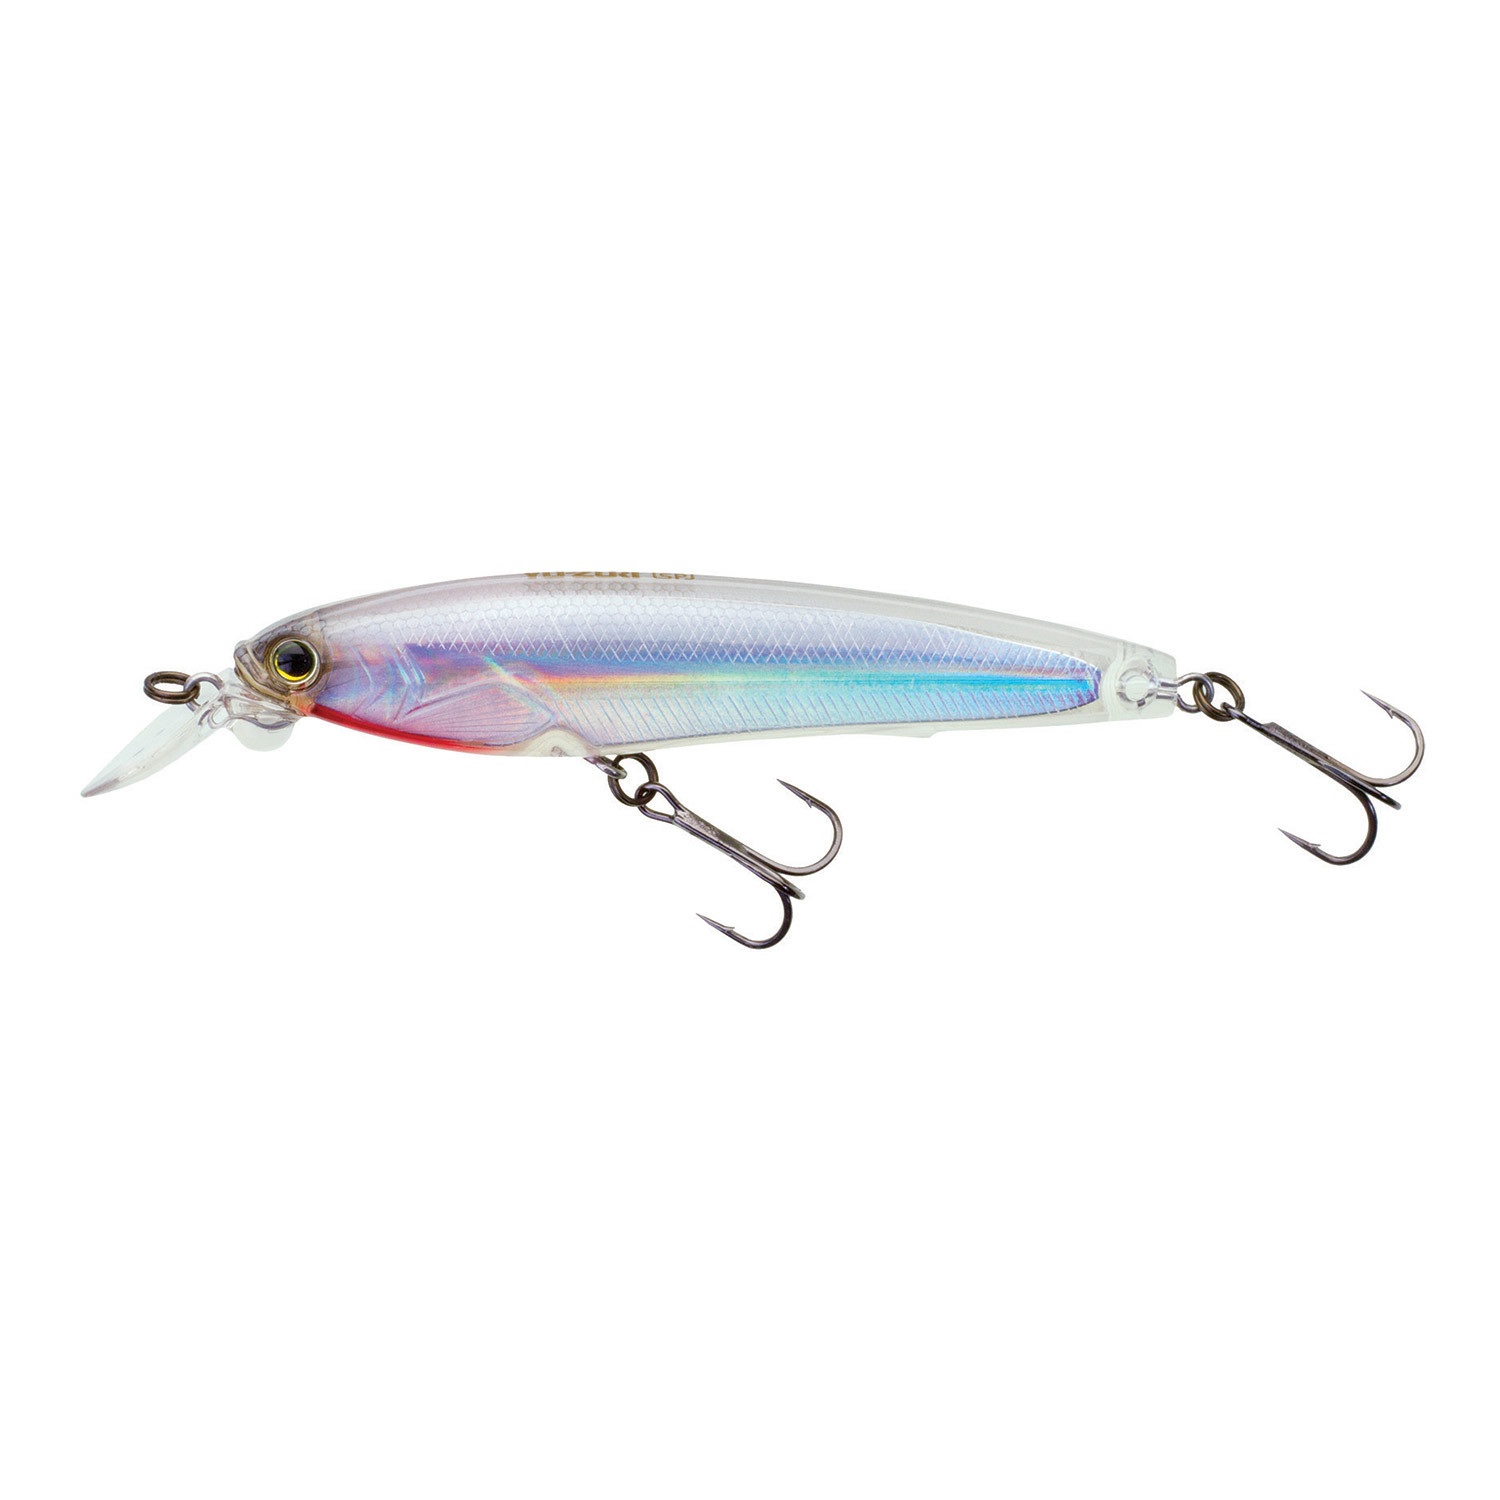 3DS Minnow™ Fishing Lure, 4"